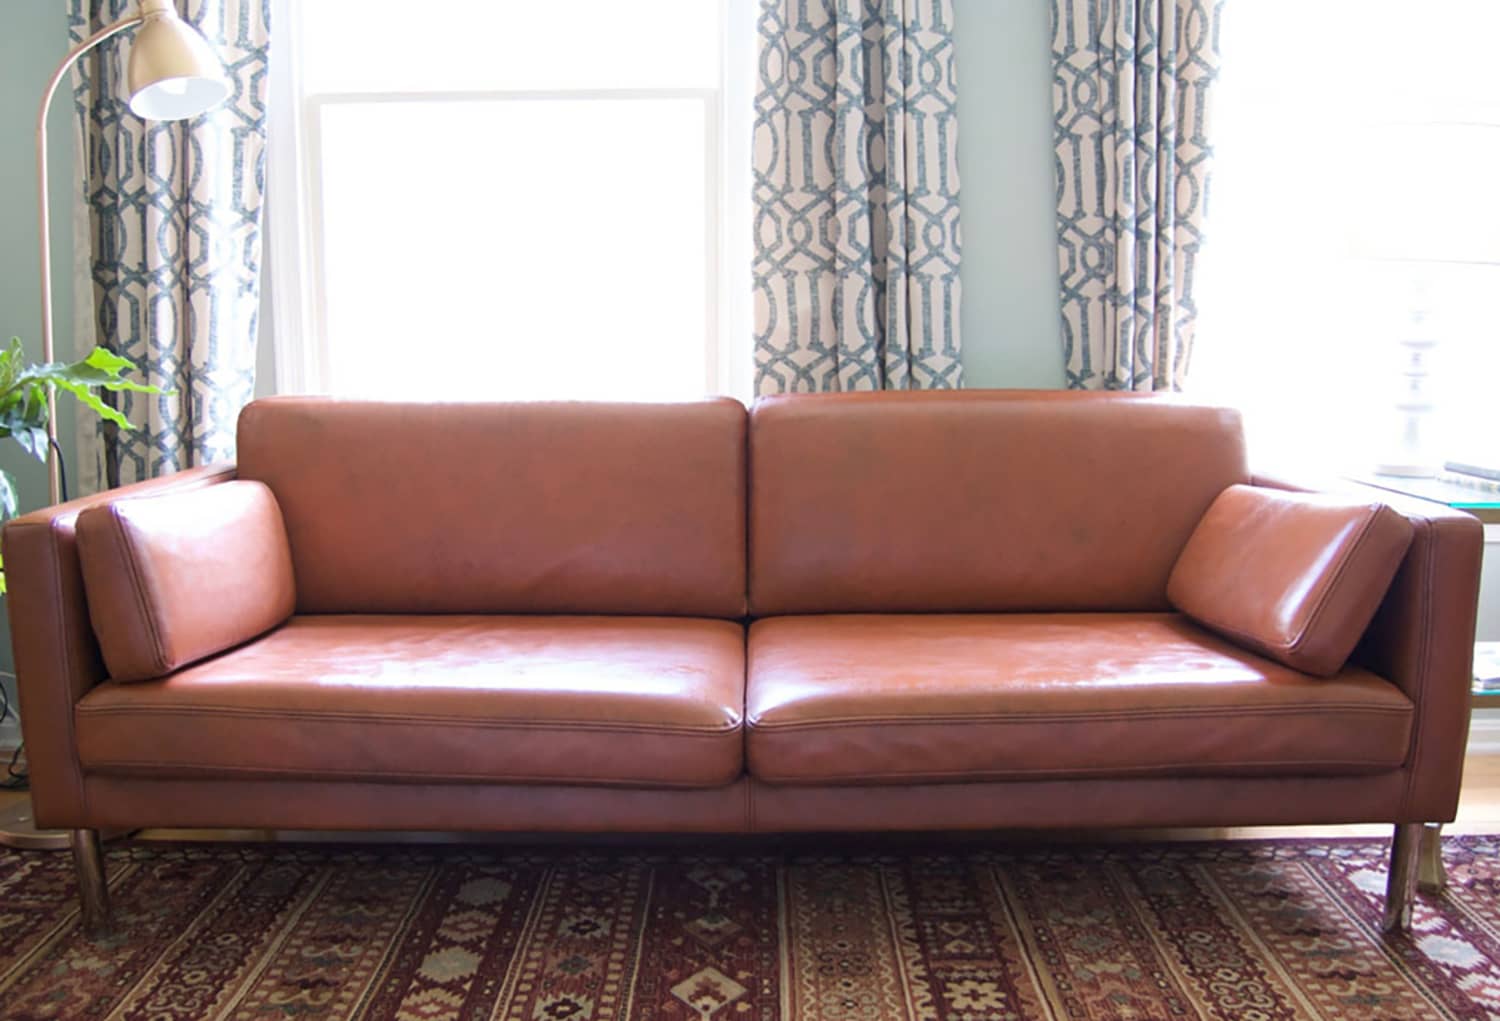 can you spray paint a leather sofa